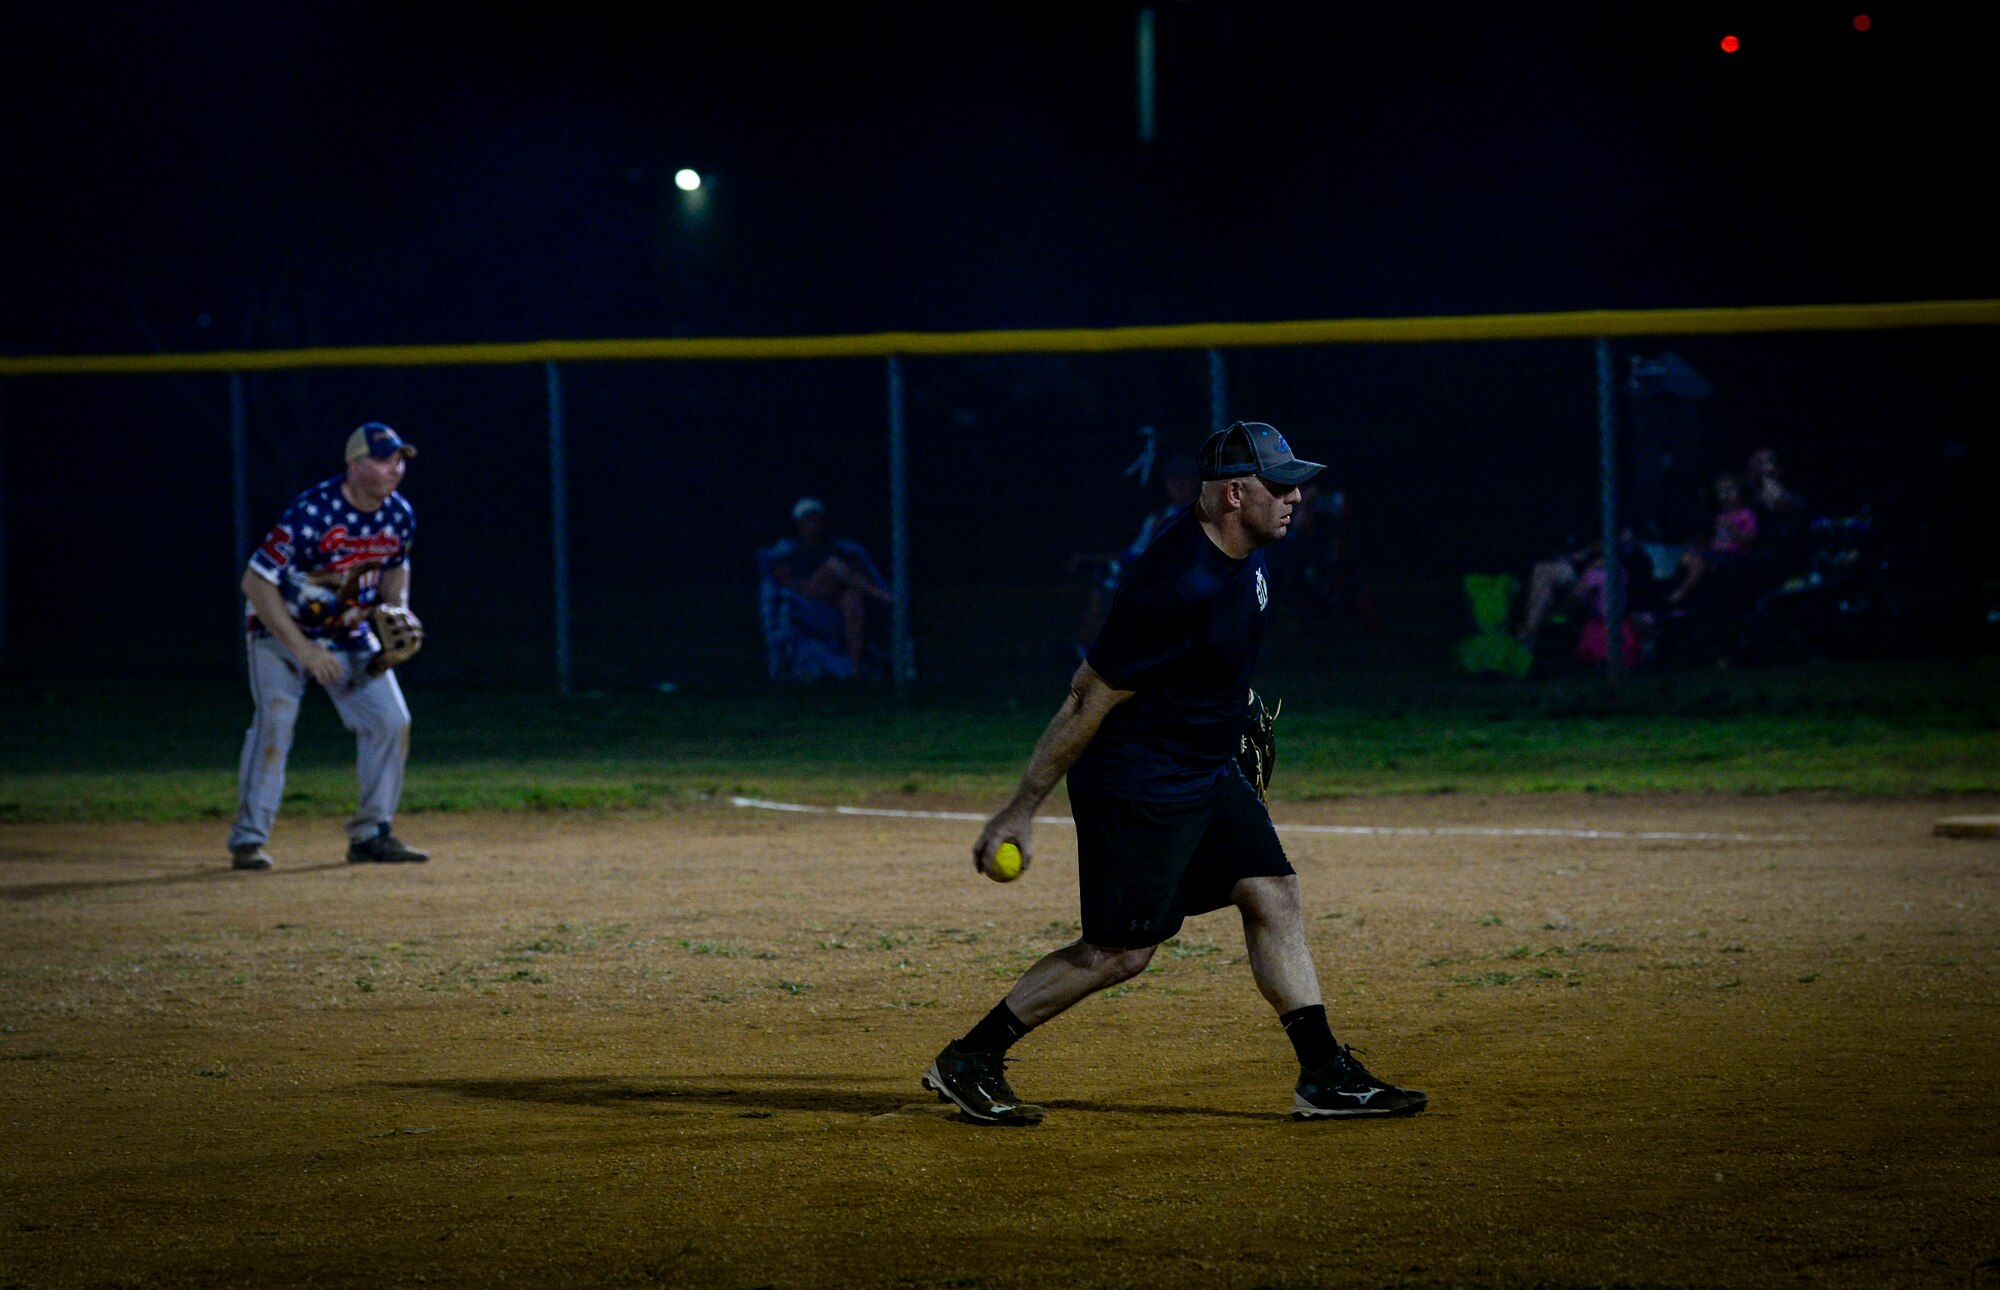 U.S. Air Force Chief Master Sgt. John Splitter, chief enlisted manager assigned to the 36th Civil Engineer Squadron, pitches the ball during the Chief’s versus Eagle’s softball game at Andersen Air Force Base, Guam, June 18, 2021.